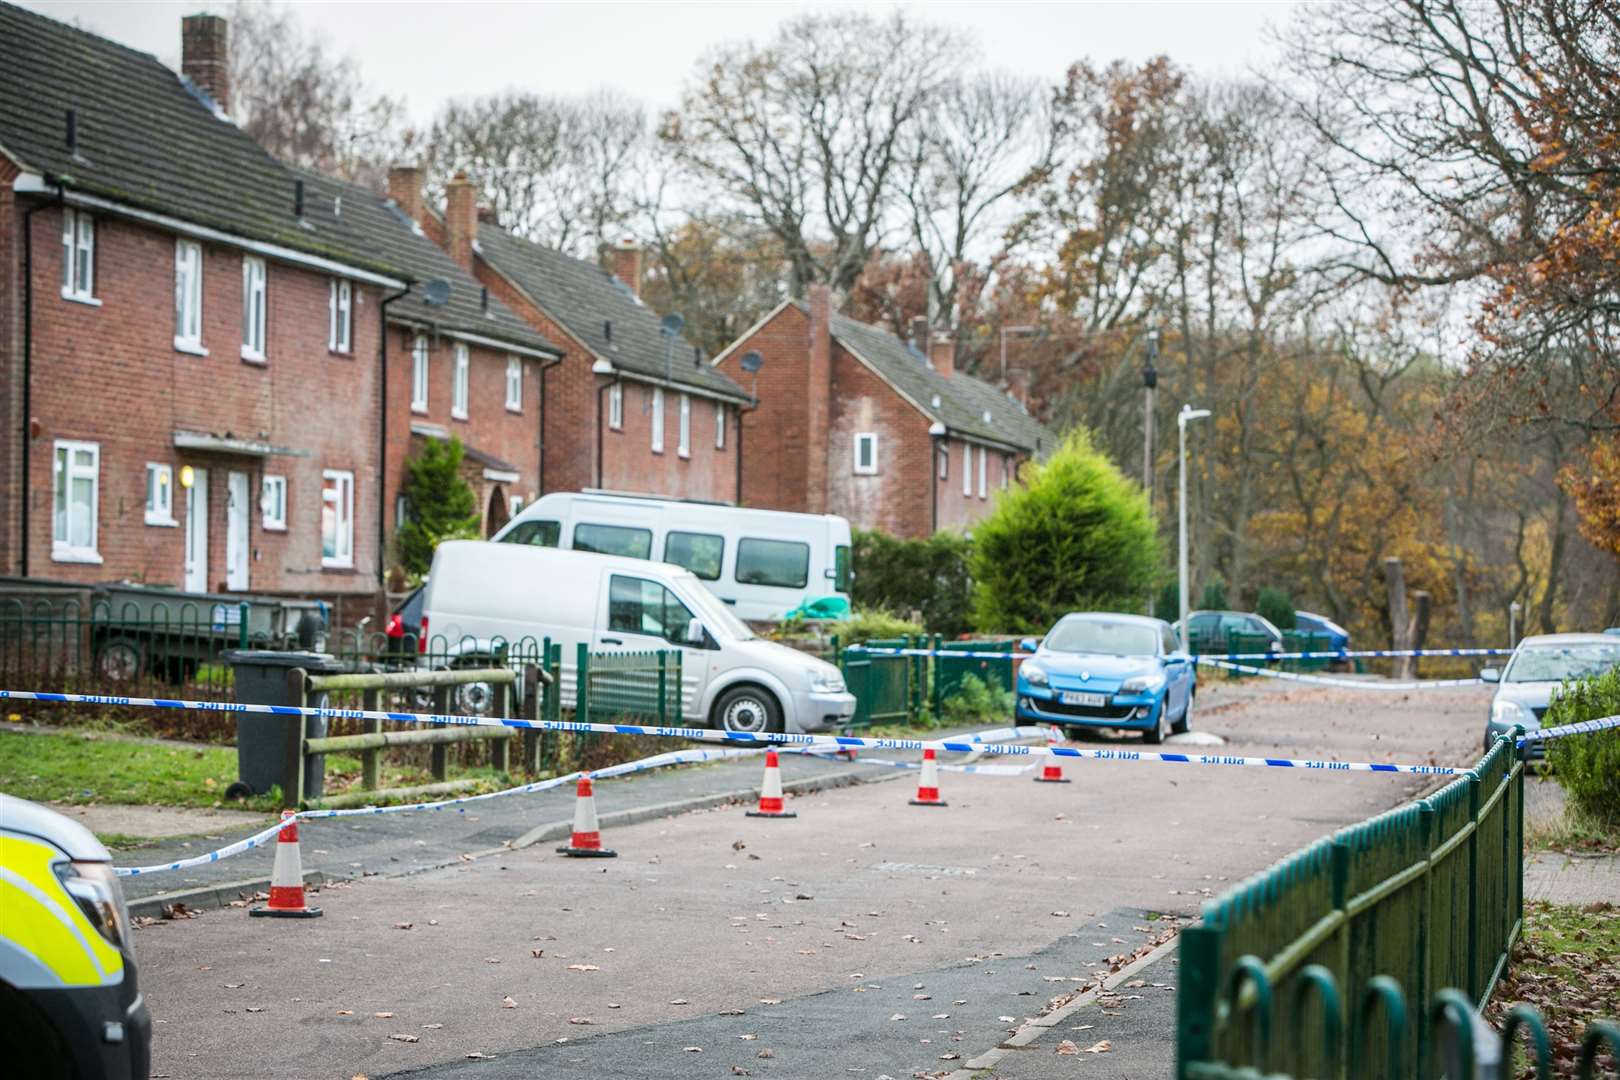 Police sealed off Spitfire Road and launched a murder investigation